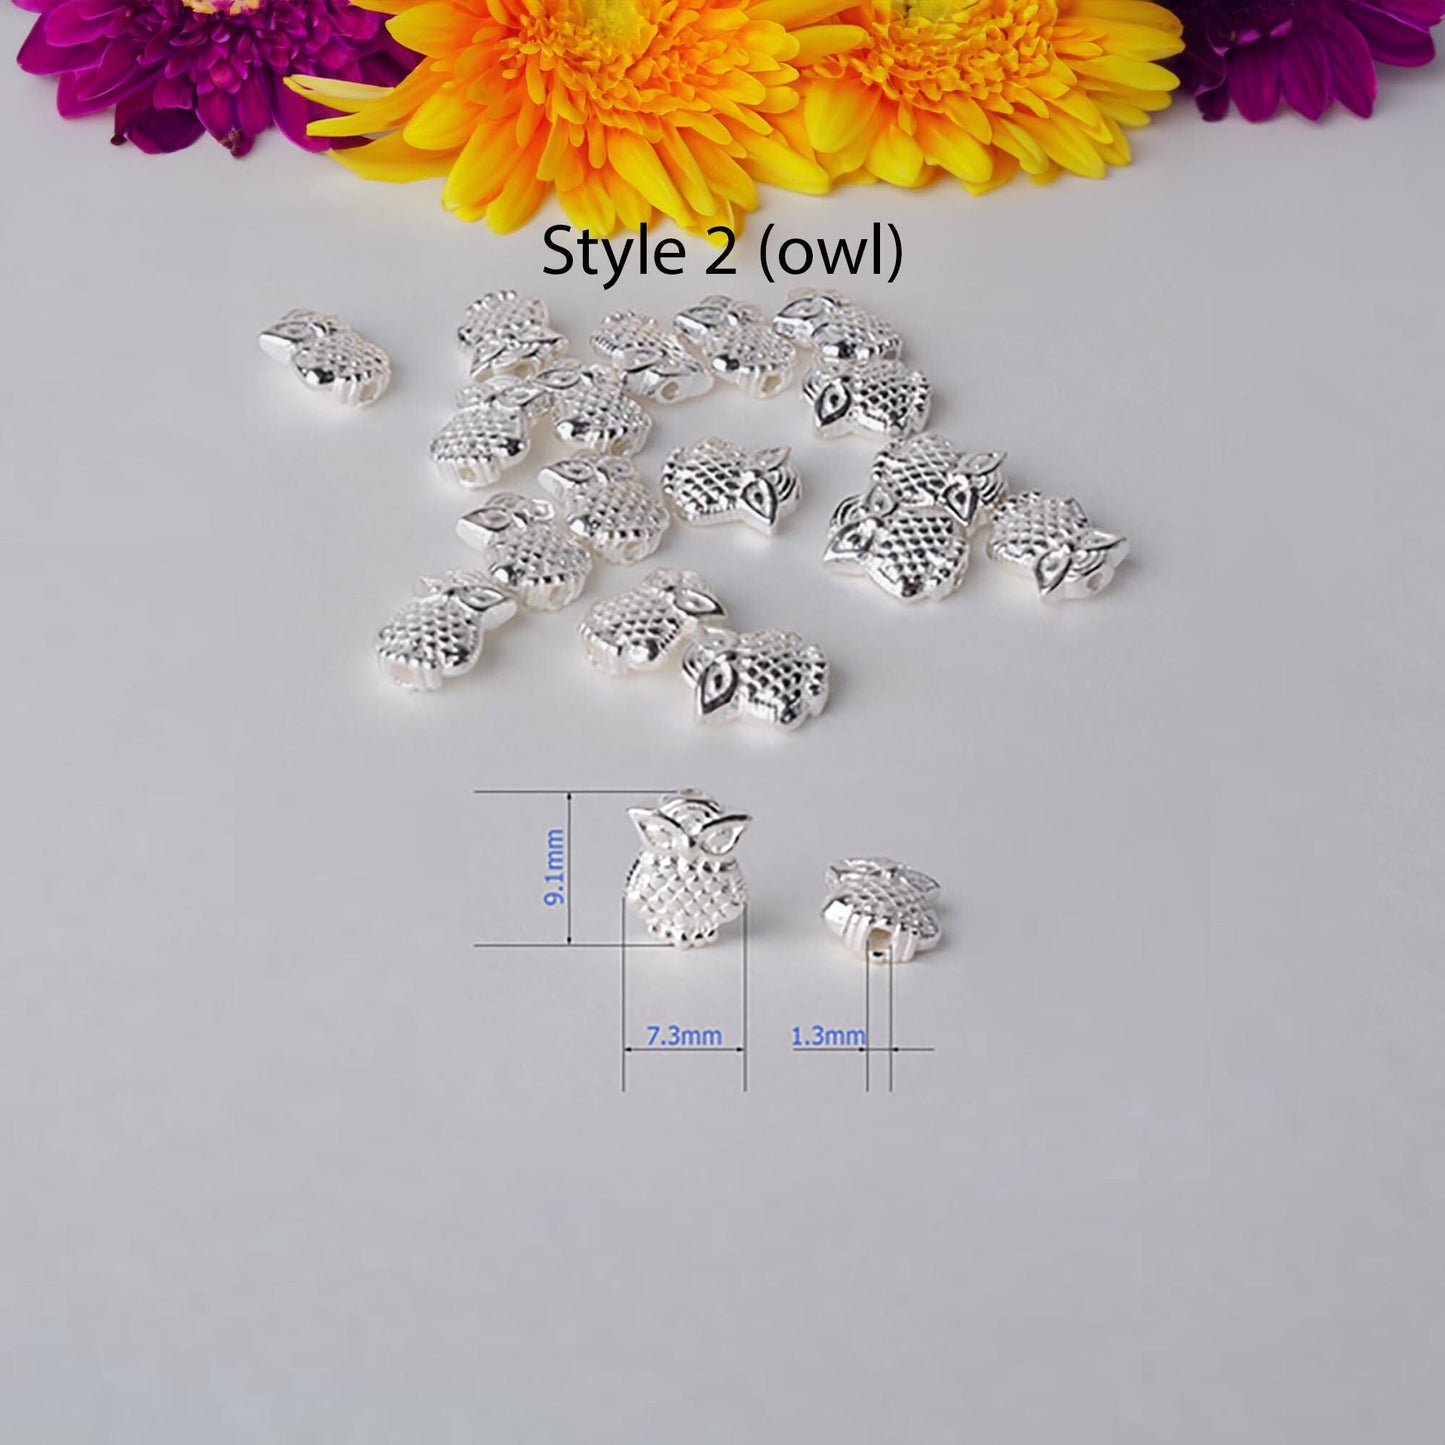 925 sterling silver spacer beads - fish, owl, butterfly charm loose bead, Hole 1-1.4mm